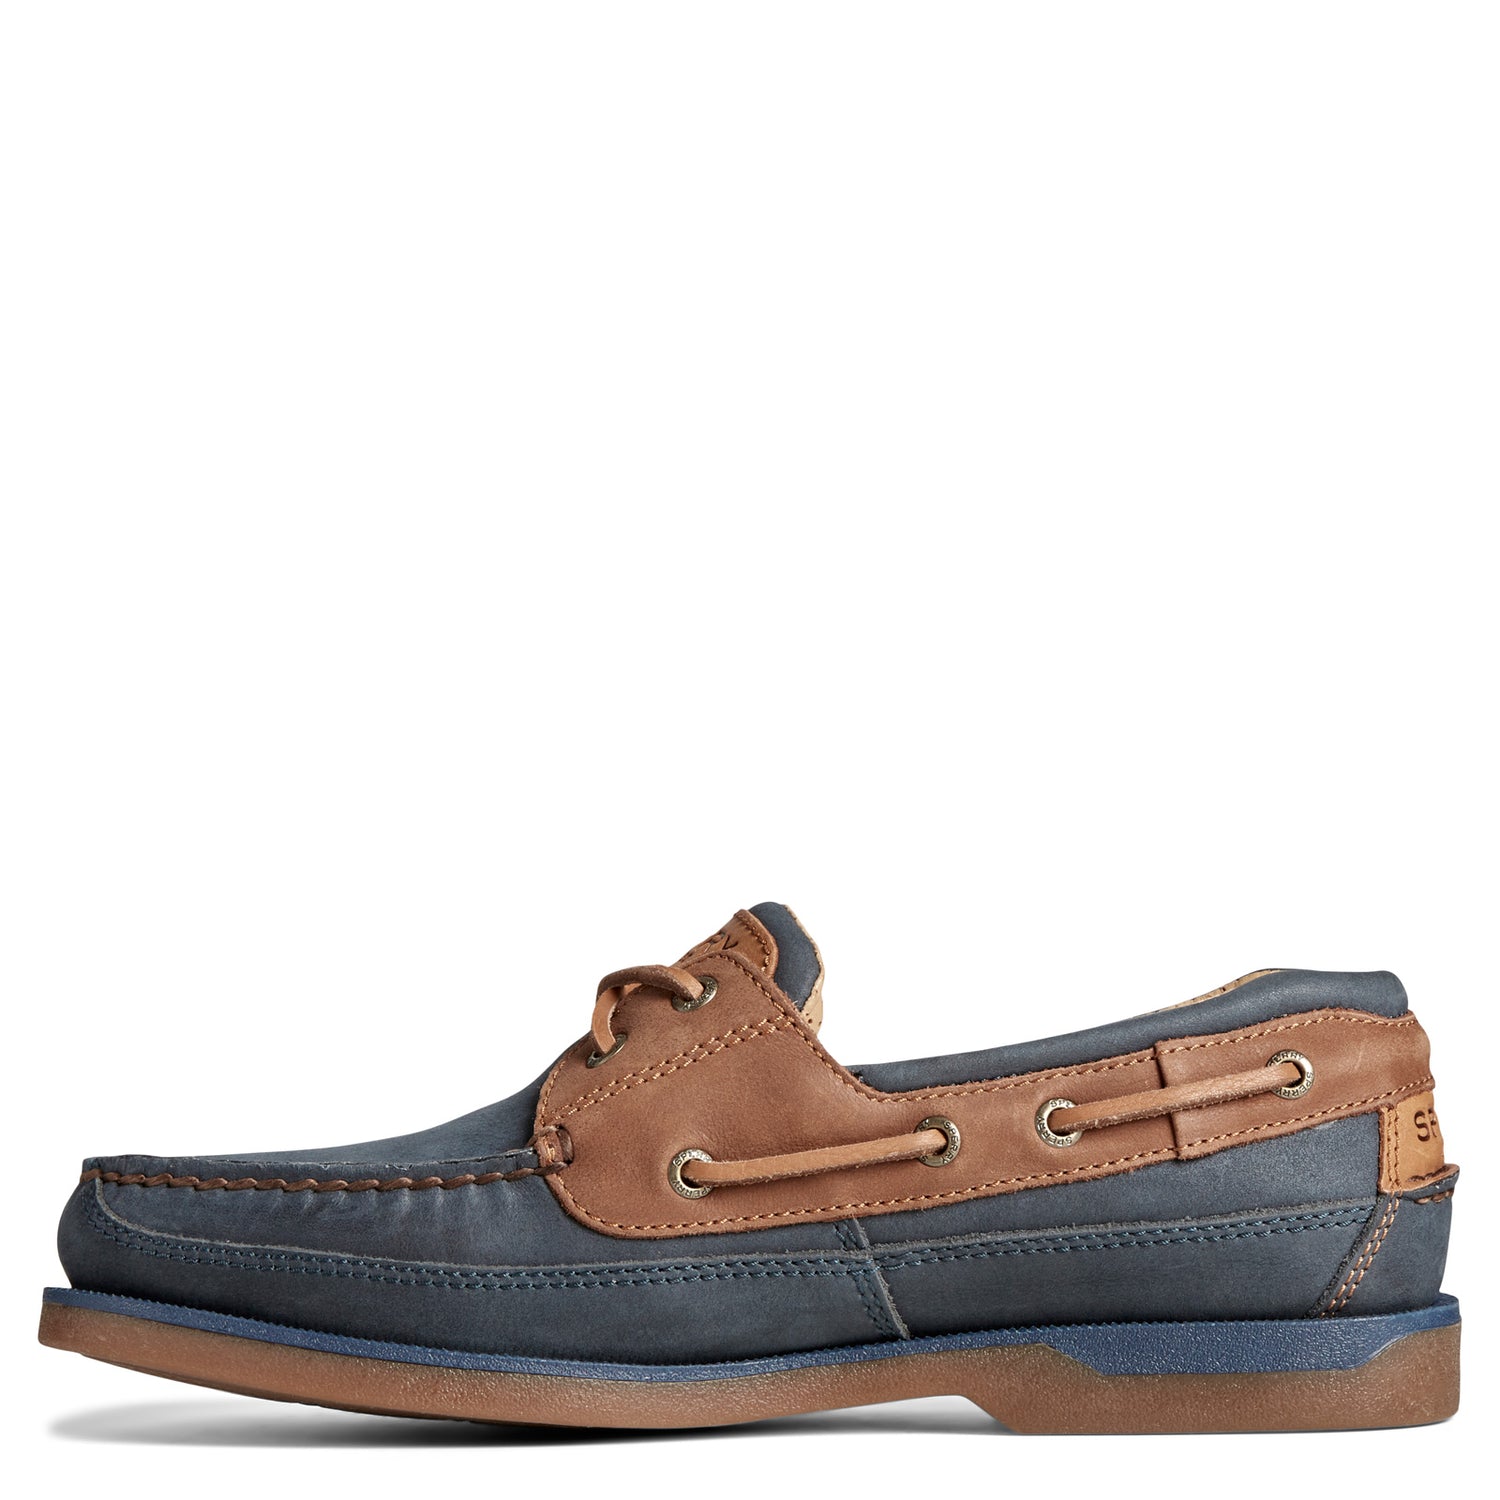 Sperry, Shoes, Mens Sperry Mako 2 Eye Moc Boat Shoes